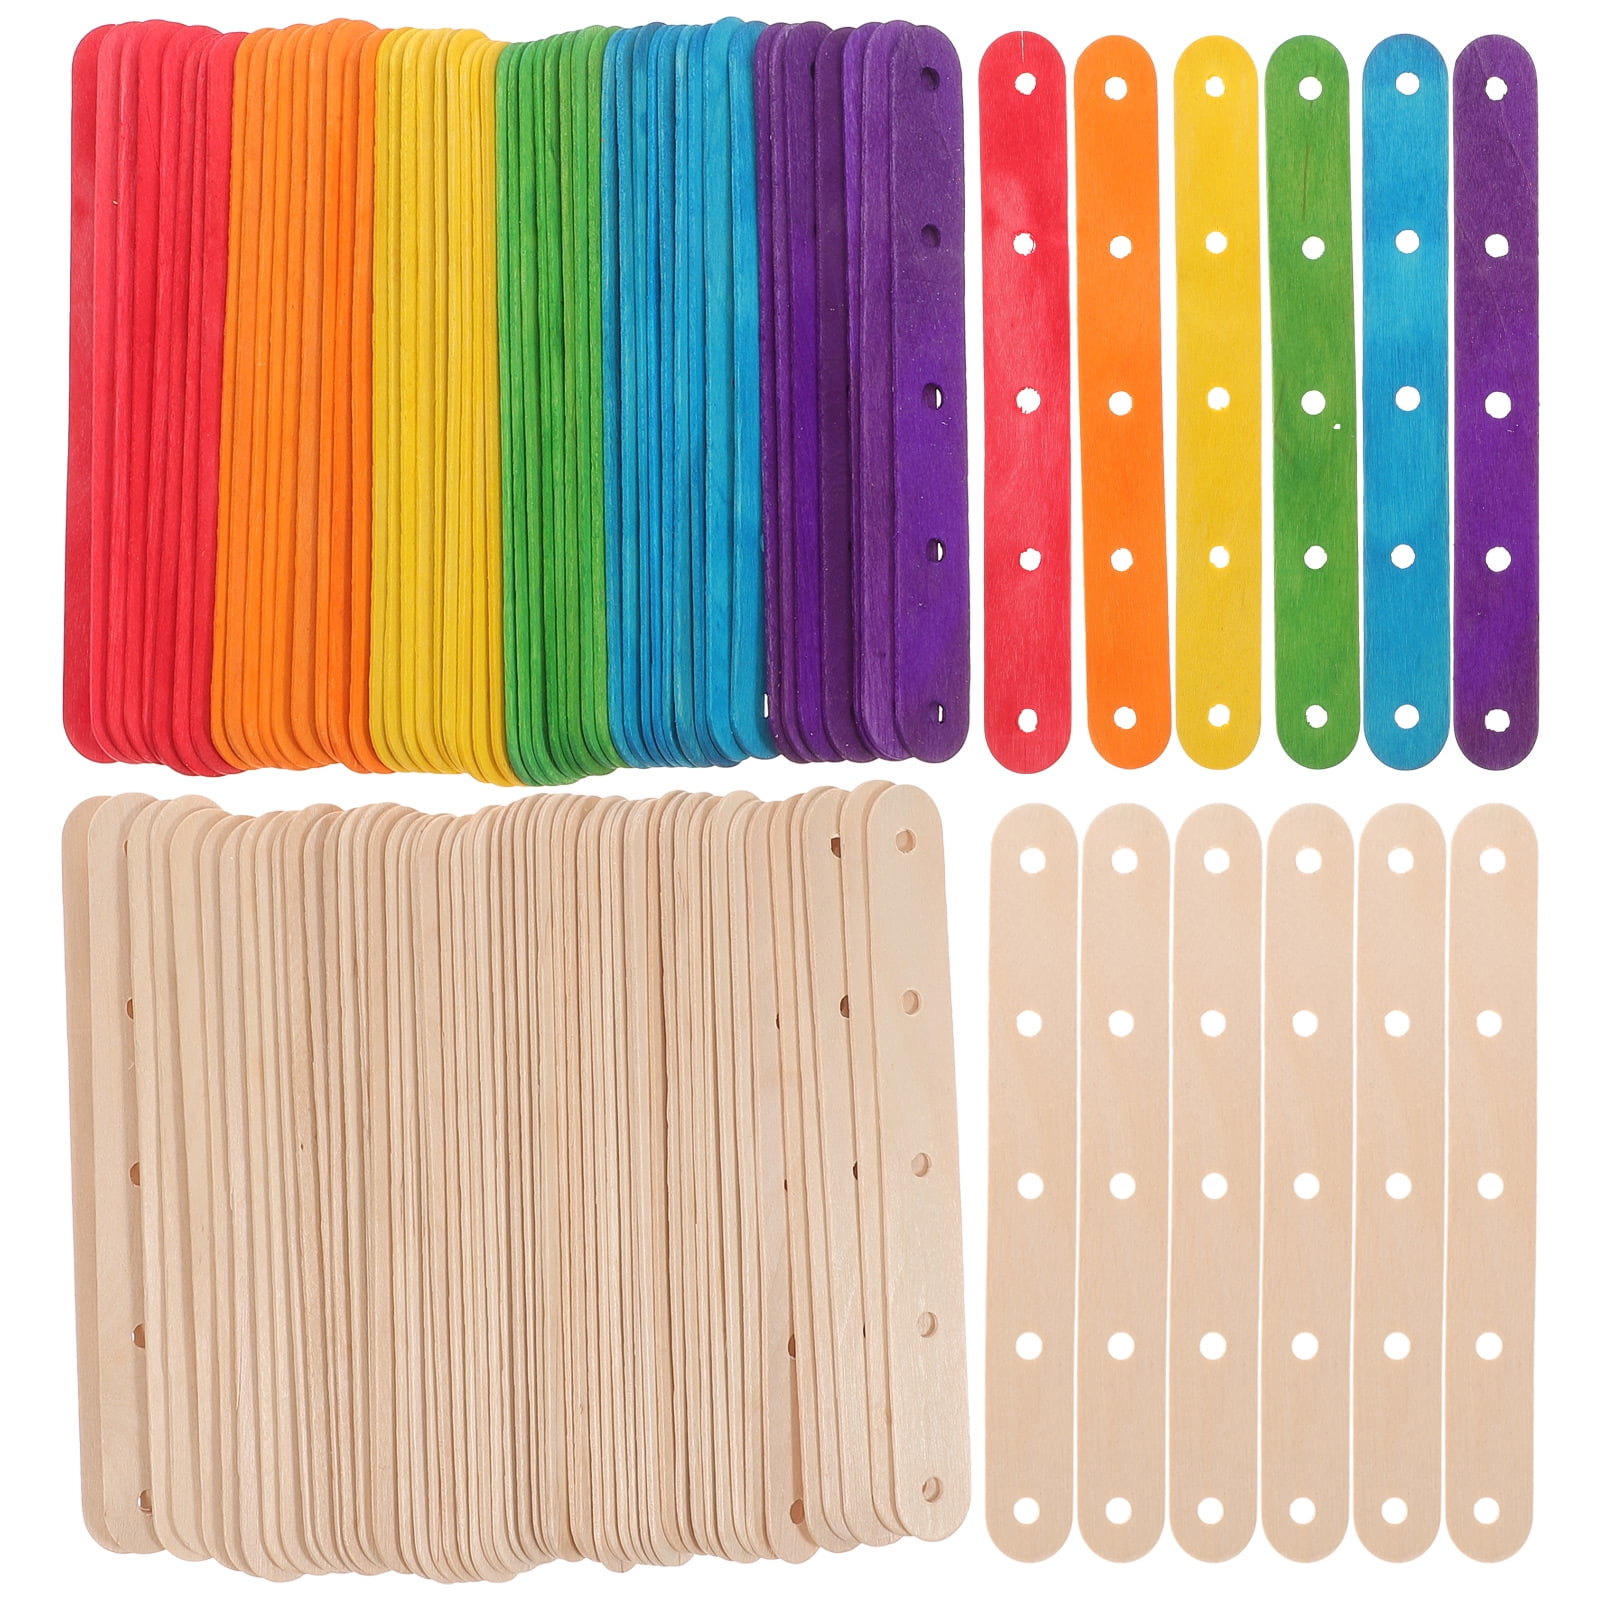 Colorations Large Wood Craft Sticks - 500 Pieces 